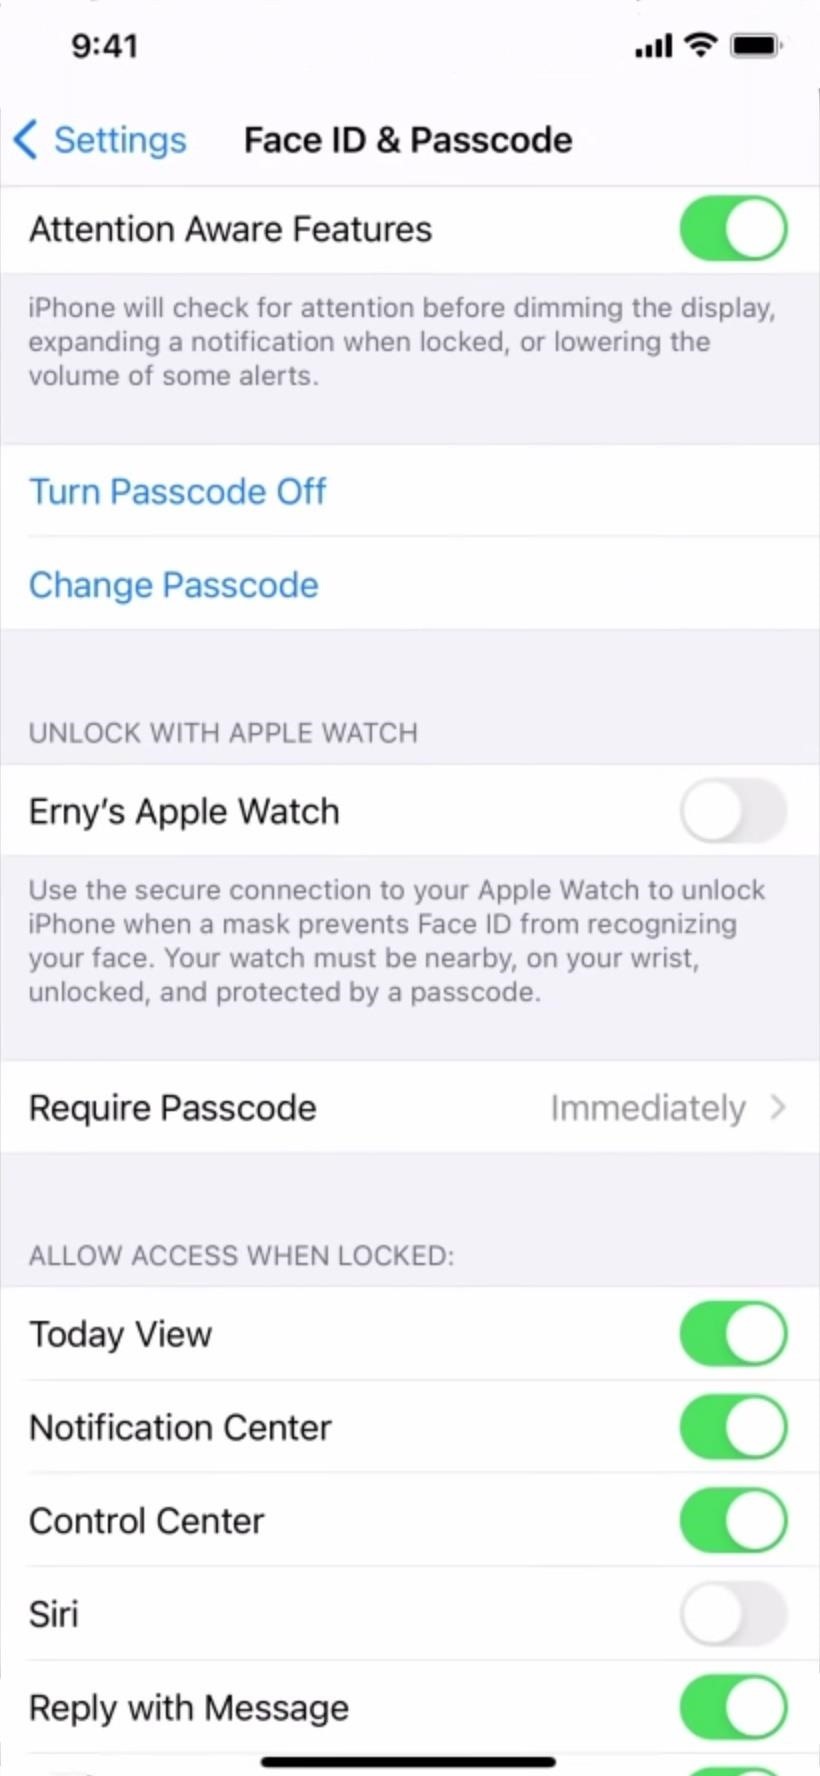 Unlocking Your iPhone While Wearing a Mask Just Got Way Easier